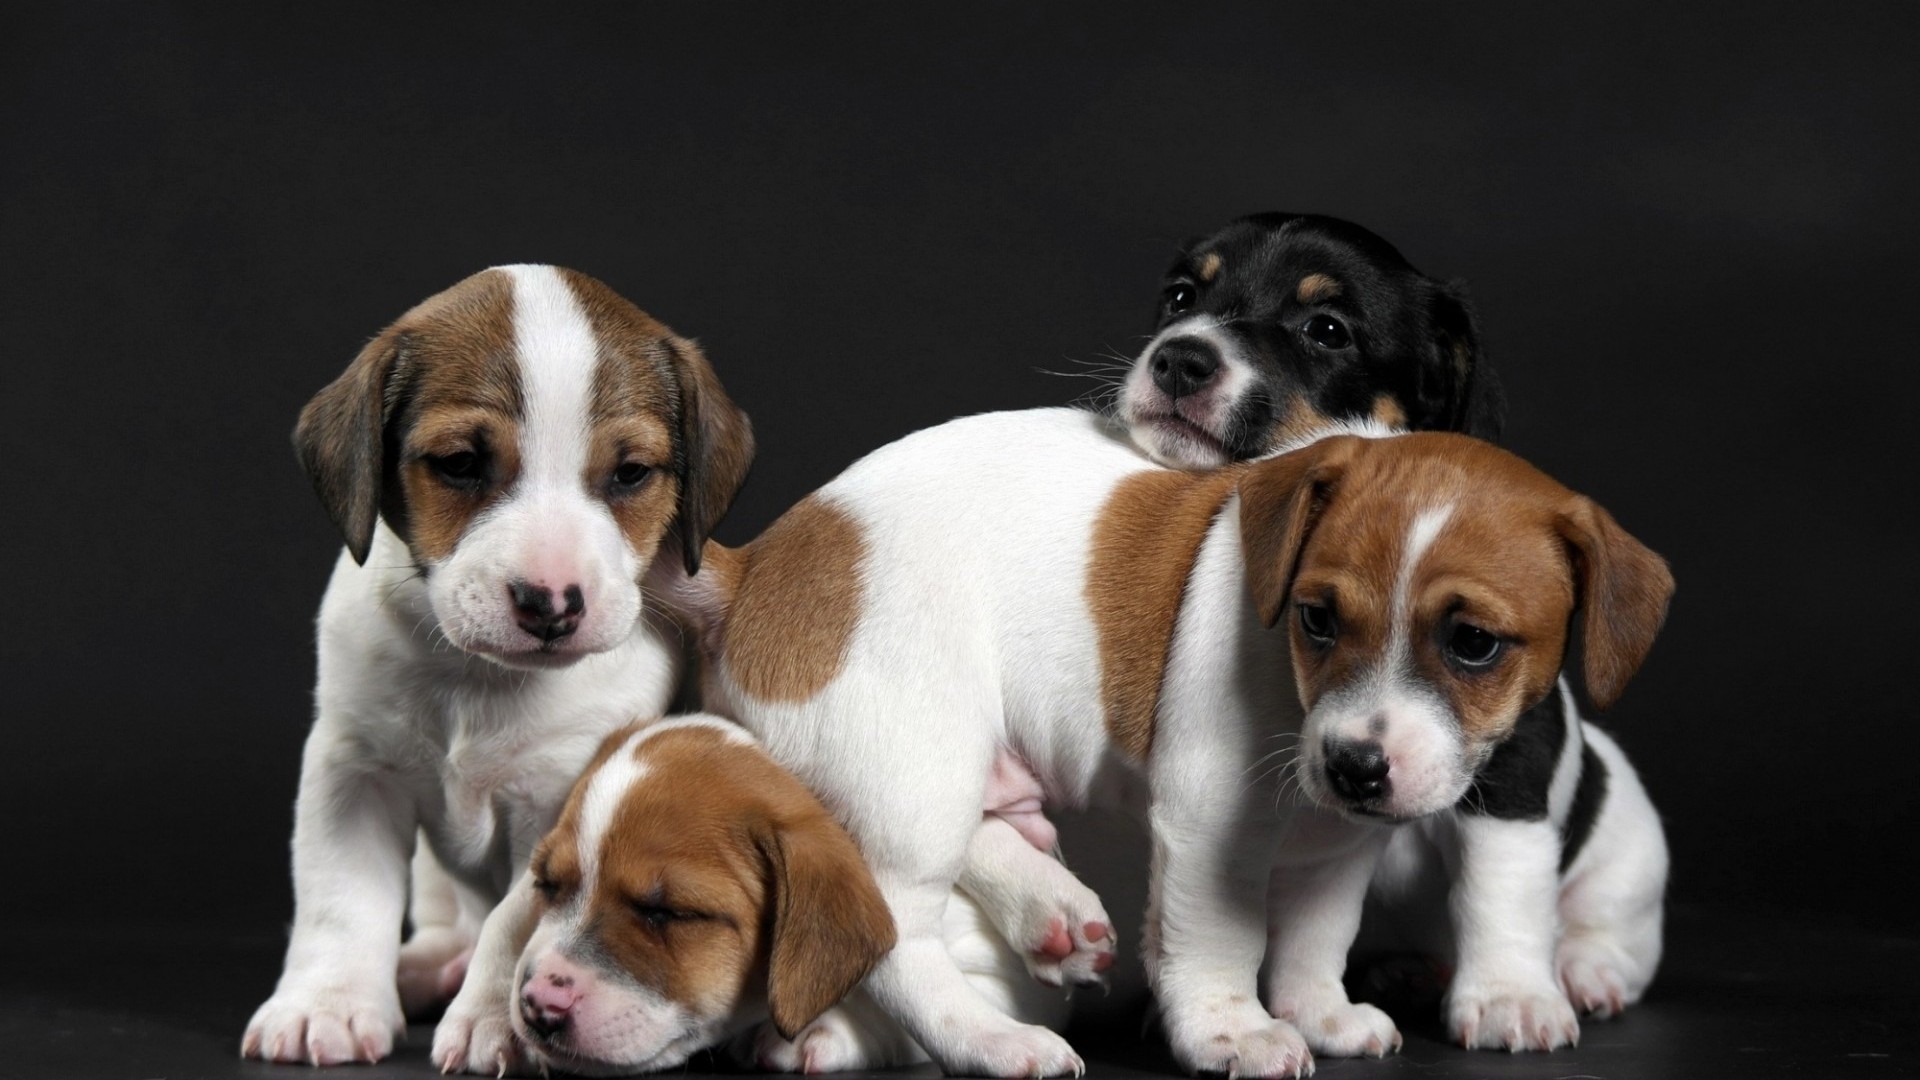 Cute Little Puppies for 1920 x 1080 HDTV 1080p resolution